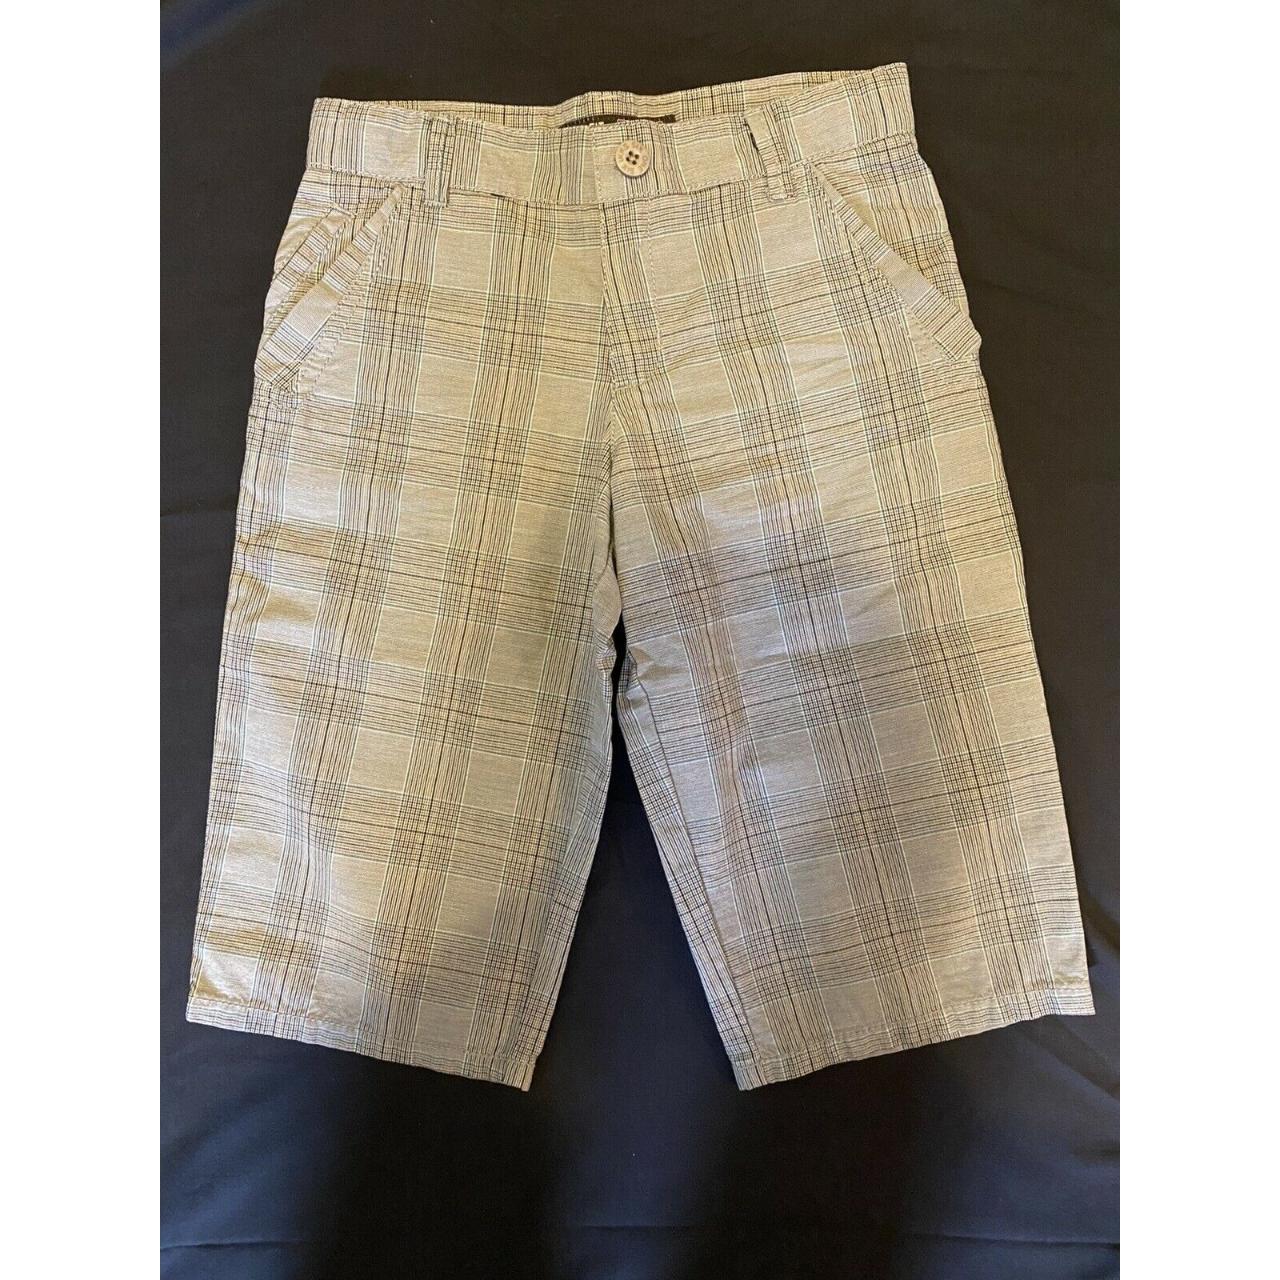 These were sold to me as New Without Tags. They do... - Depop